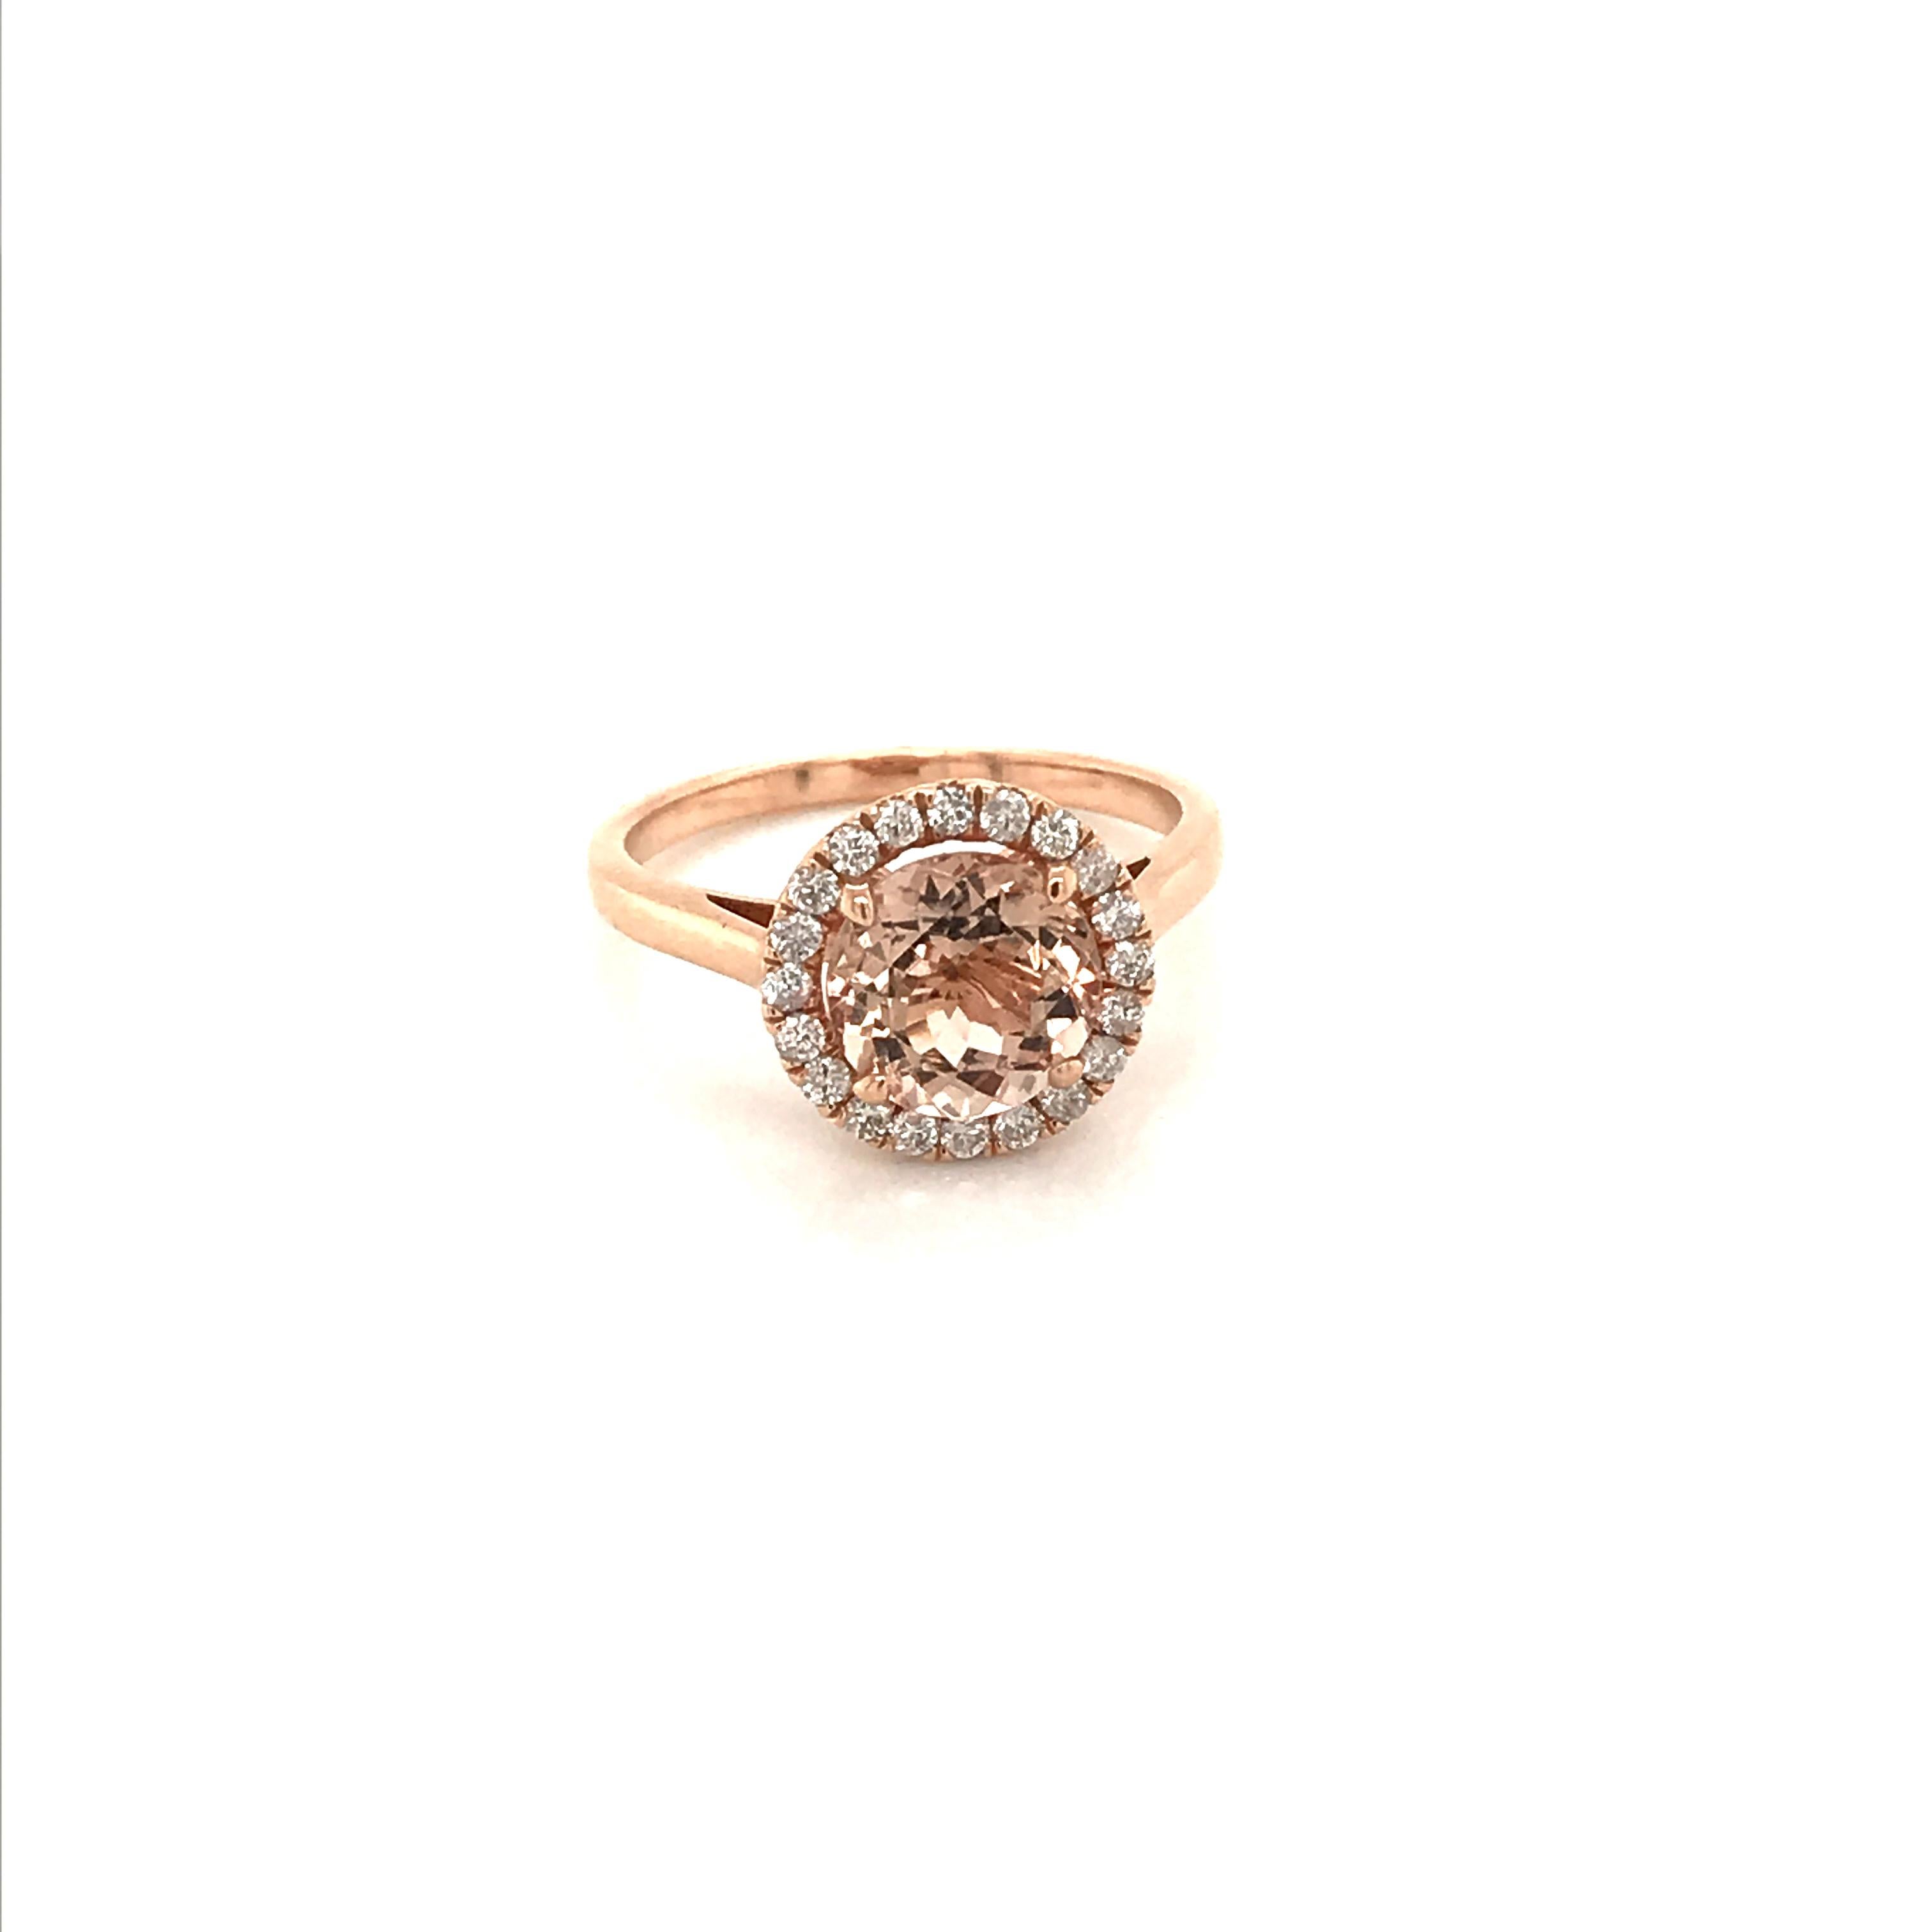 This is a stunning natural morganite and diamond ring set in solid 14K rose gold. The natural 9MM round cut morganite has an excellent peachy pink color and is surrounded by a white diamond halo. The ring is stamped 14K and is a great gift